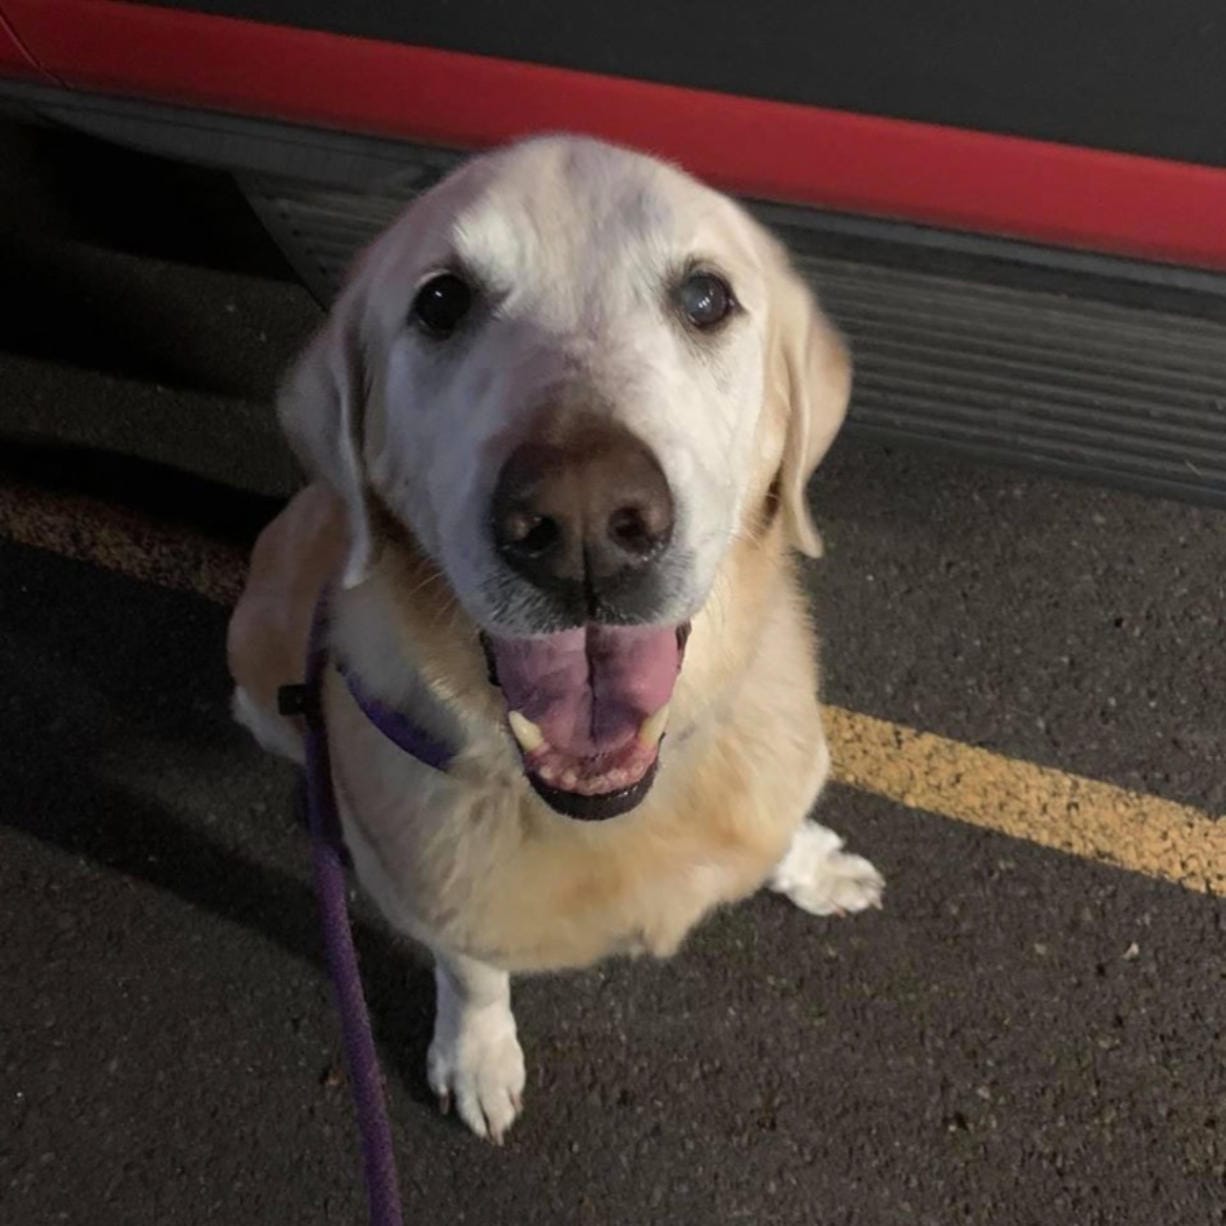 Henry, a 13-year-old Labrador retriever, was abandoned by his owner the night of Aug. 6 at Orchards Community Park. He is now reportedly doing well in a foster home through the Humane Society for Southwest Washington.